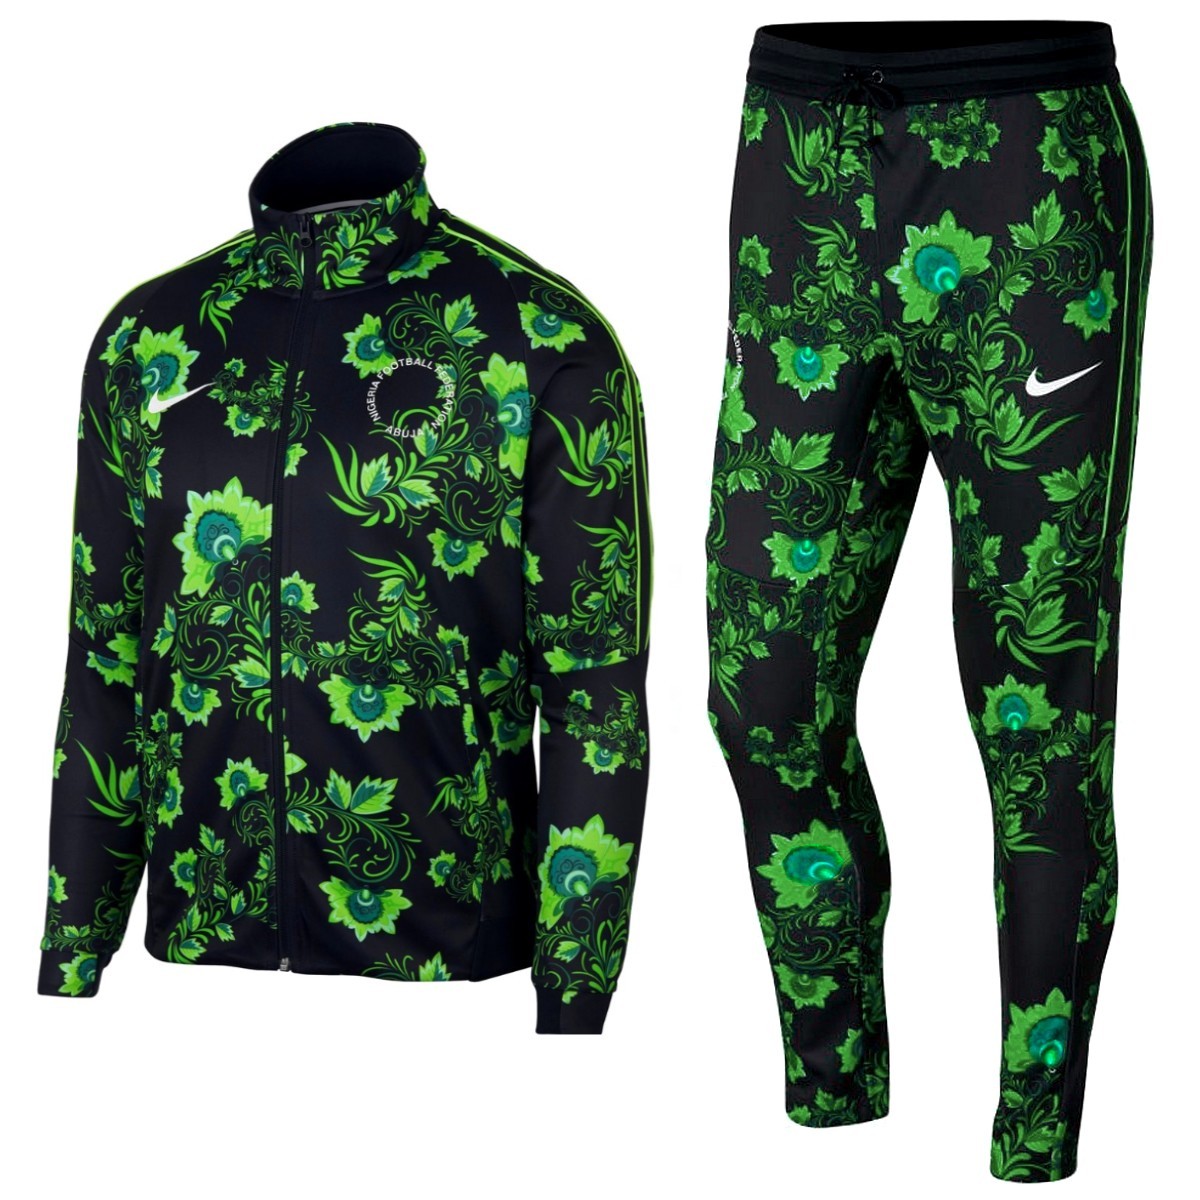 Buy official Nike Nigeria Tribute tracksuit WC 2018